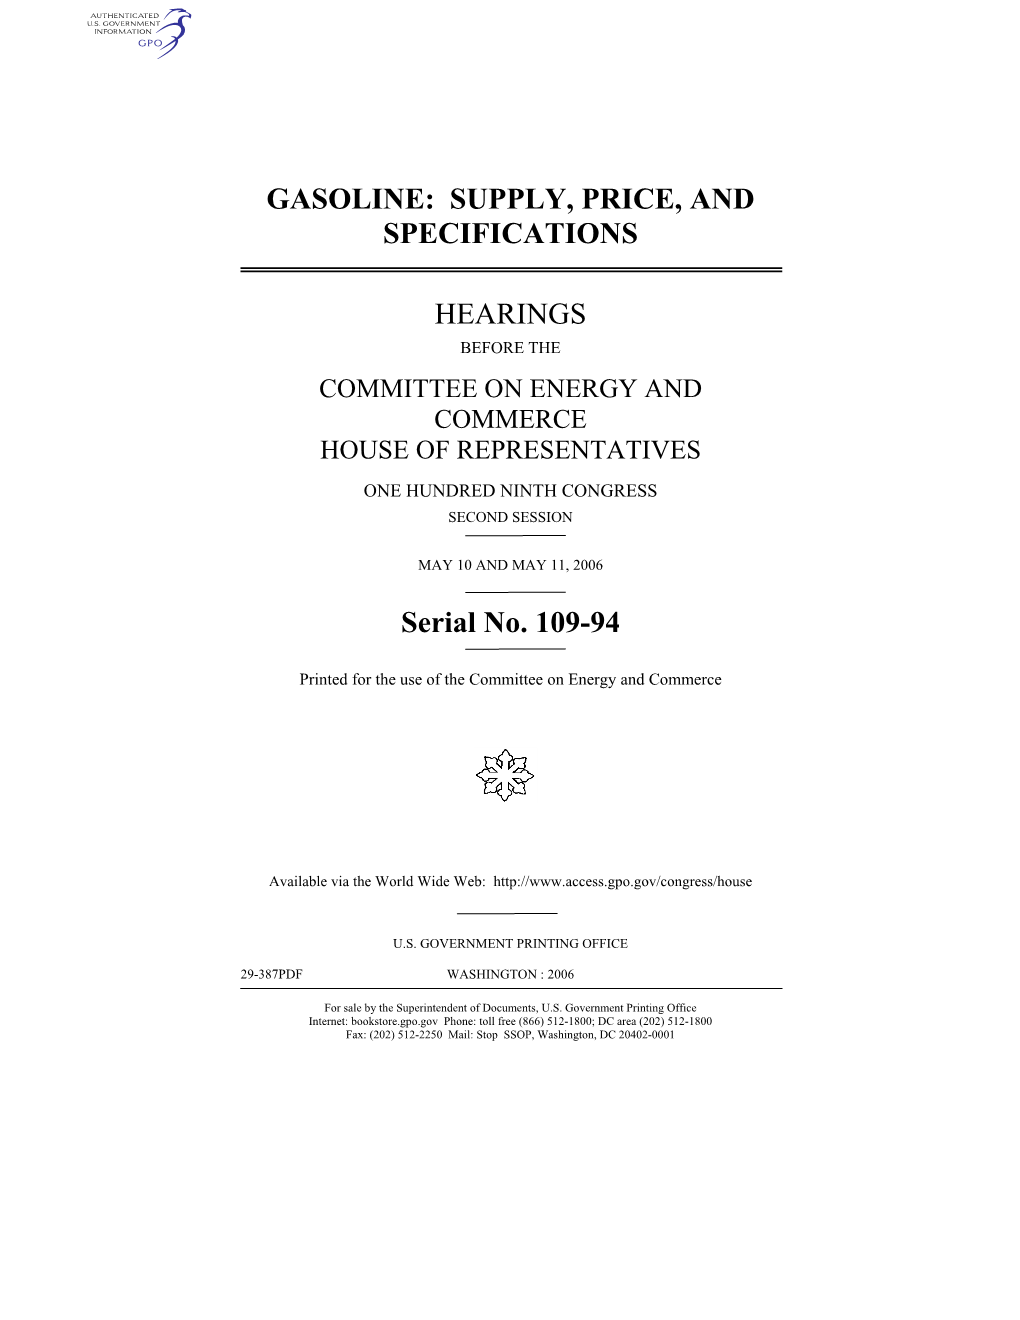 Gasoline: Supply, Price, and Specifications Hearings